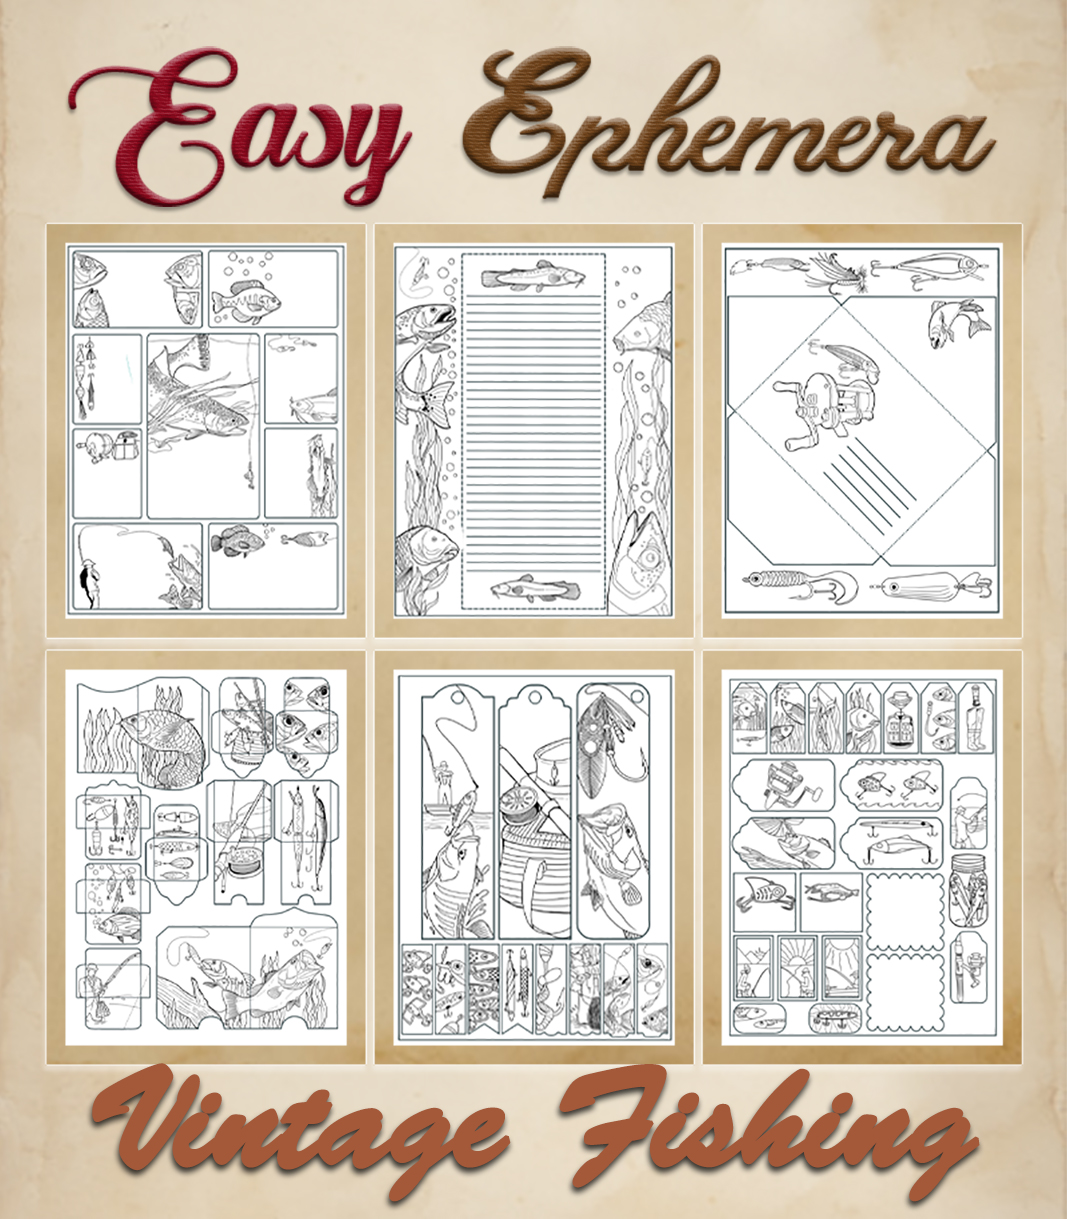 a complete image showing smaller images of all the coloring pages in a package with the title of the product "Easy Ephemera - Vintage Fishing"